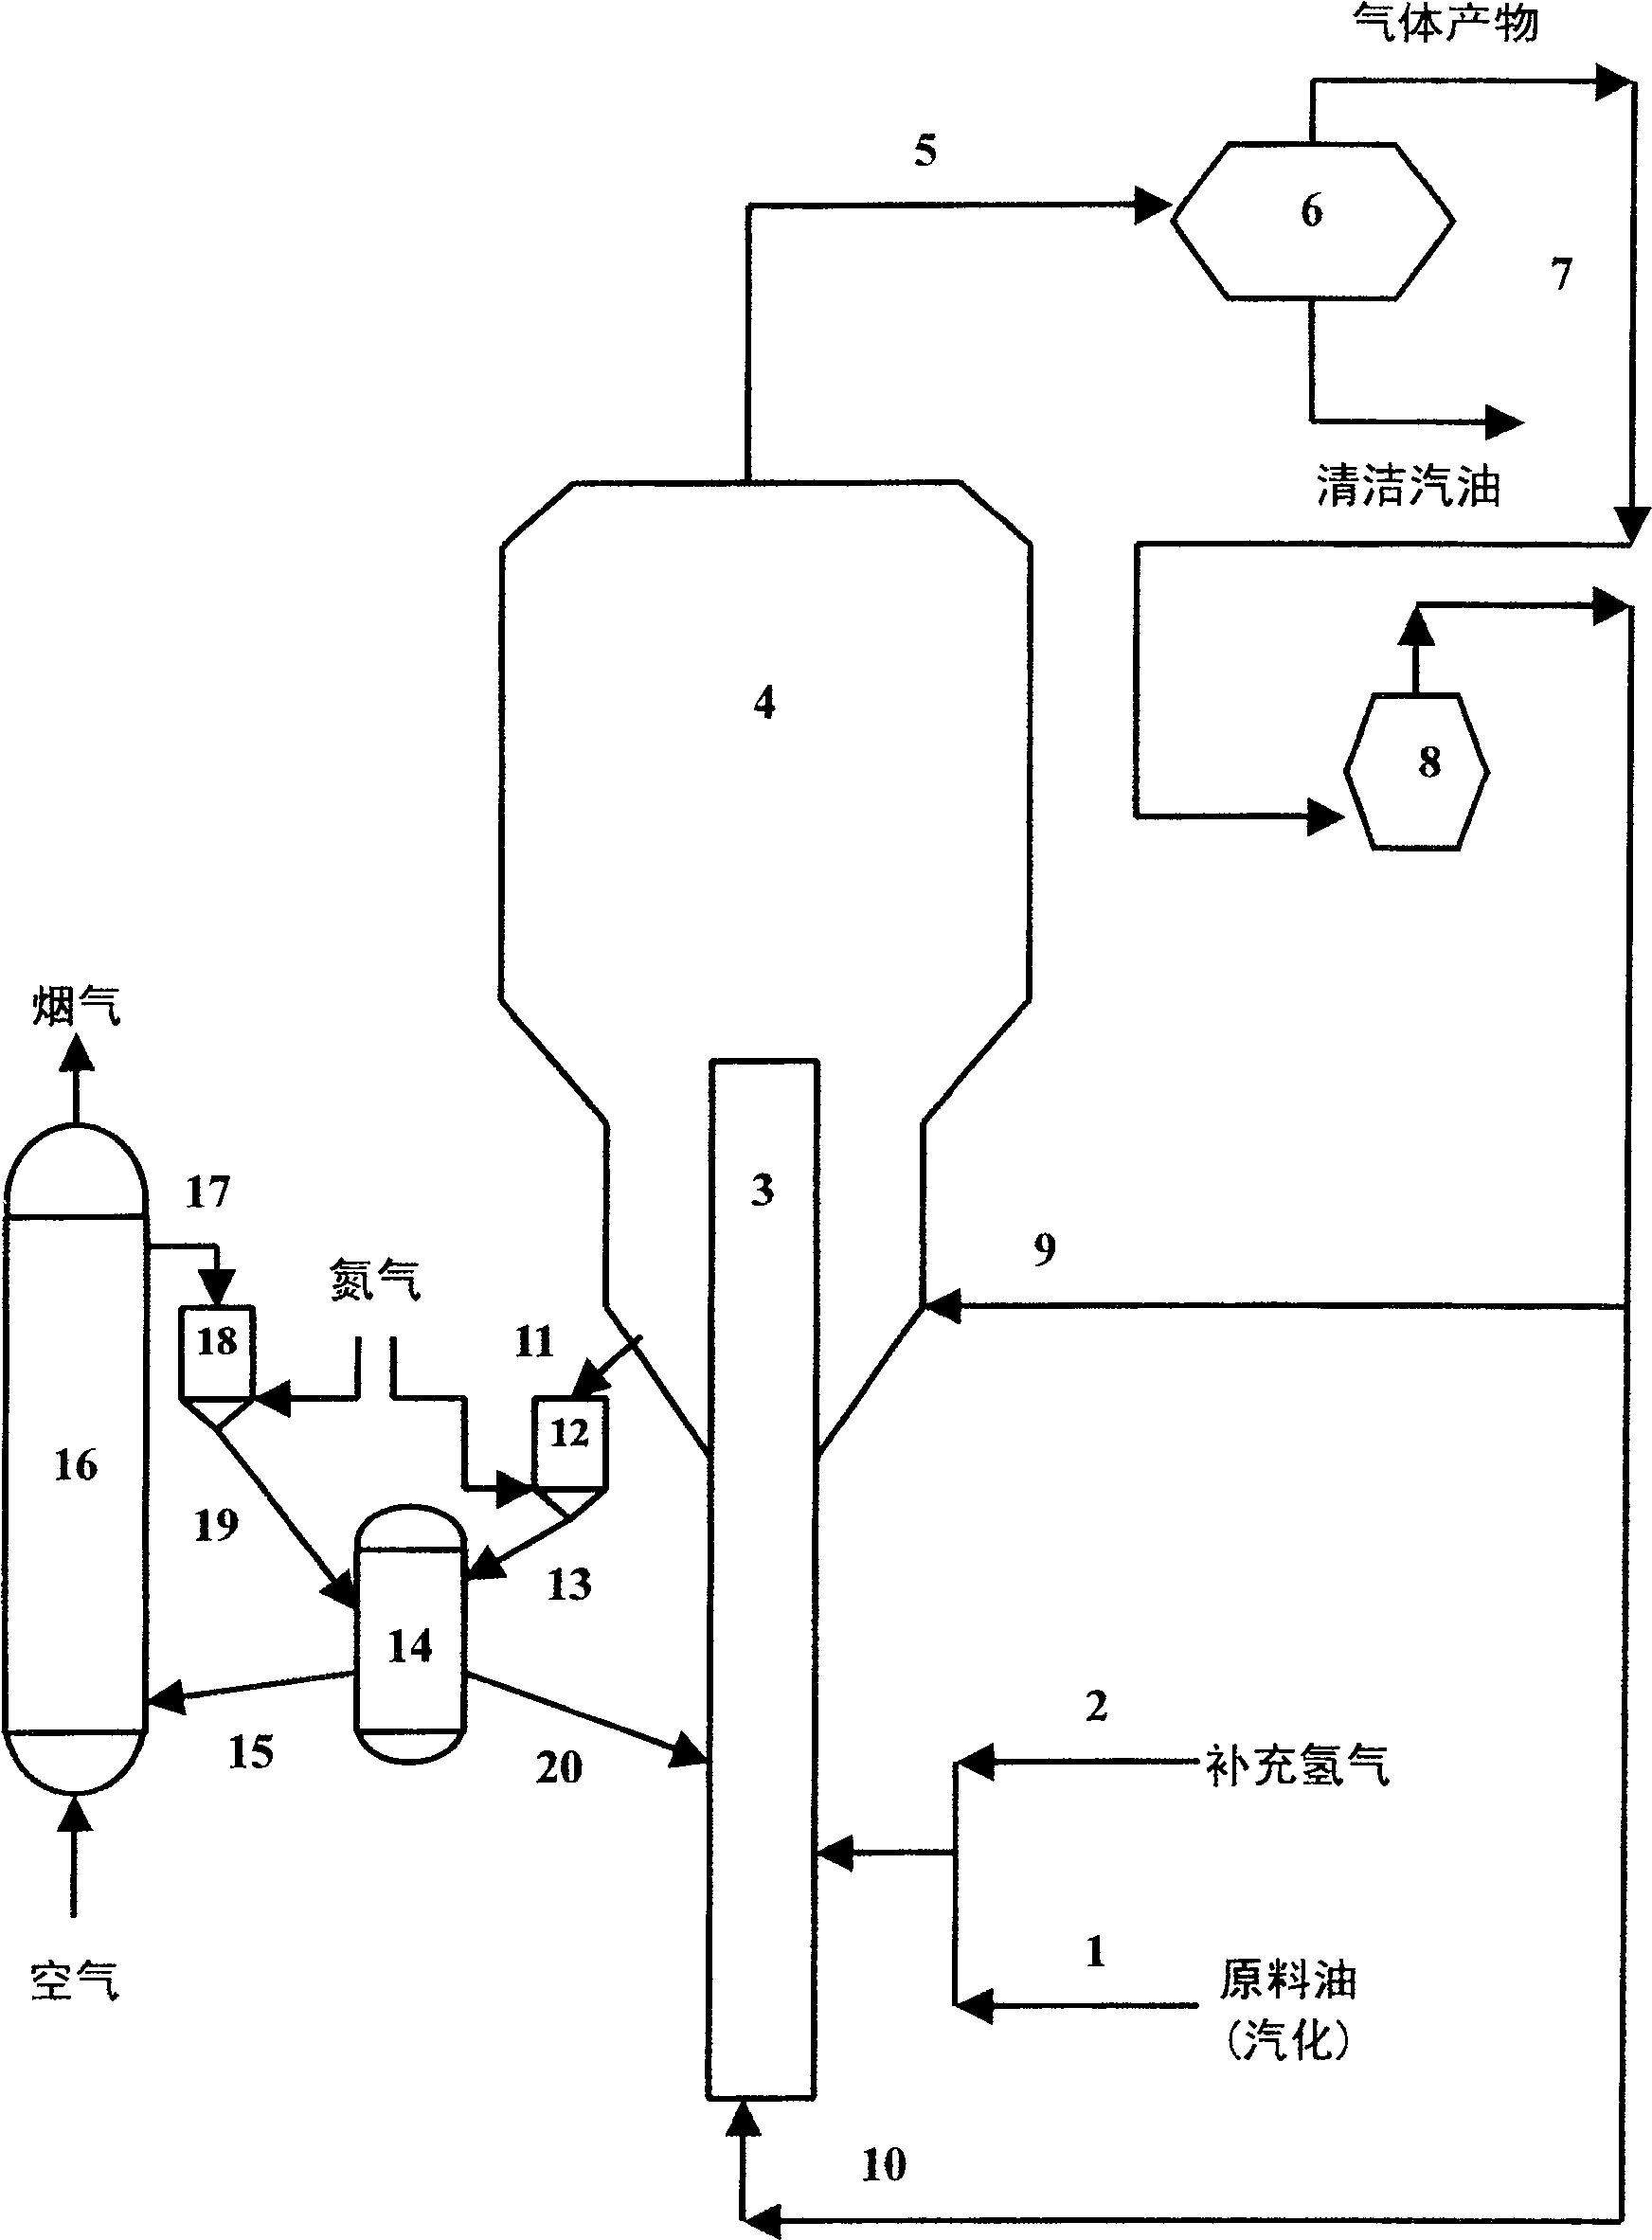 Production process of producing cleaning gasoline